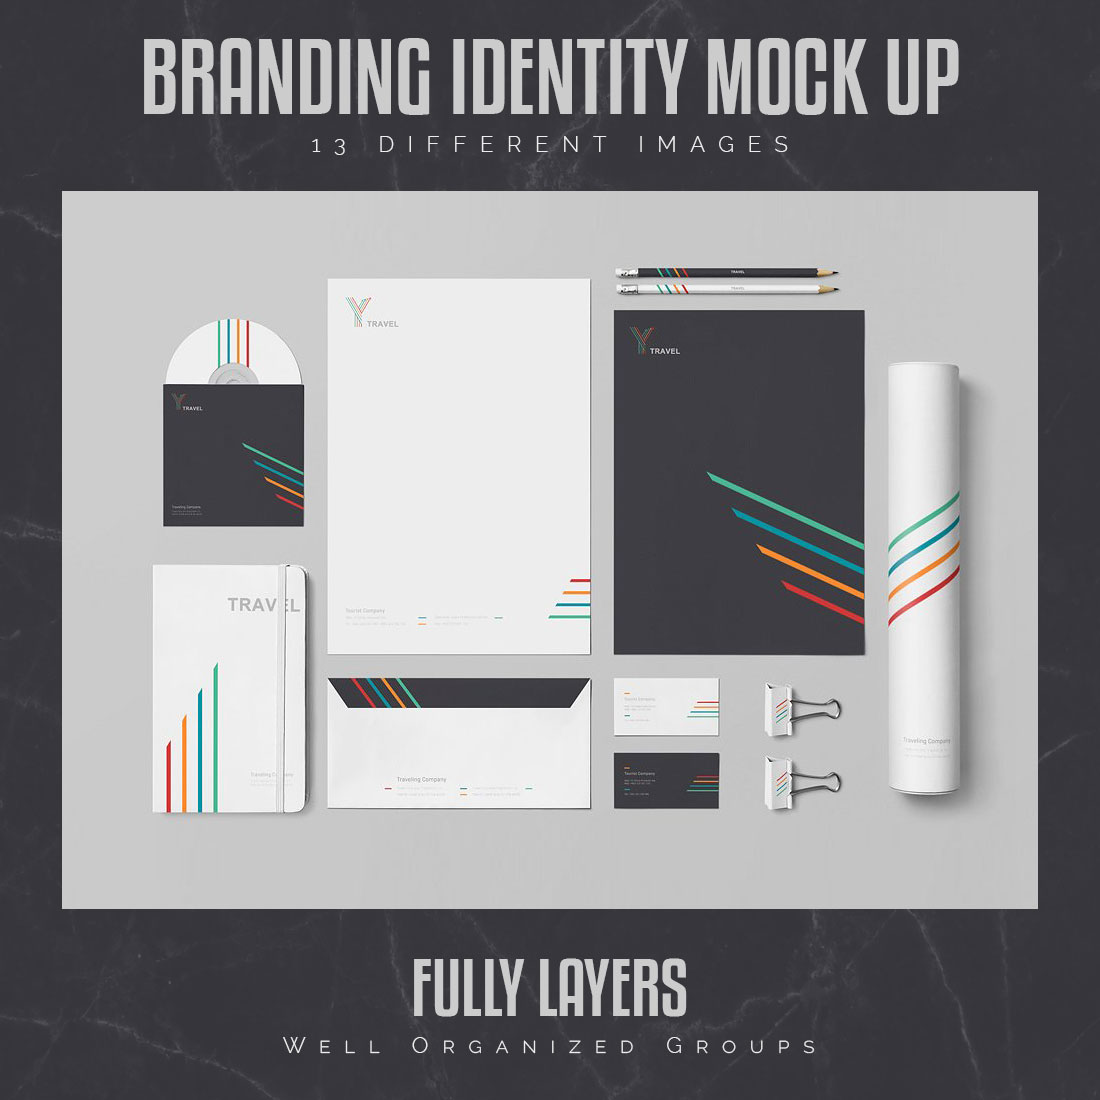 Branding Identity Mock Up preview image.